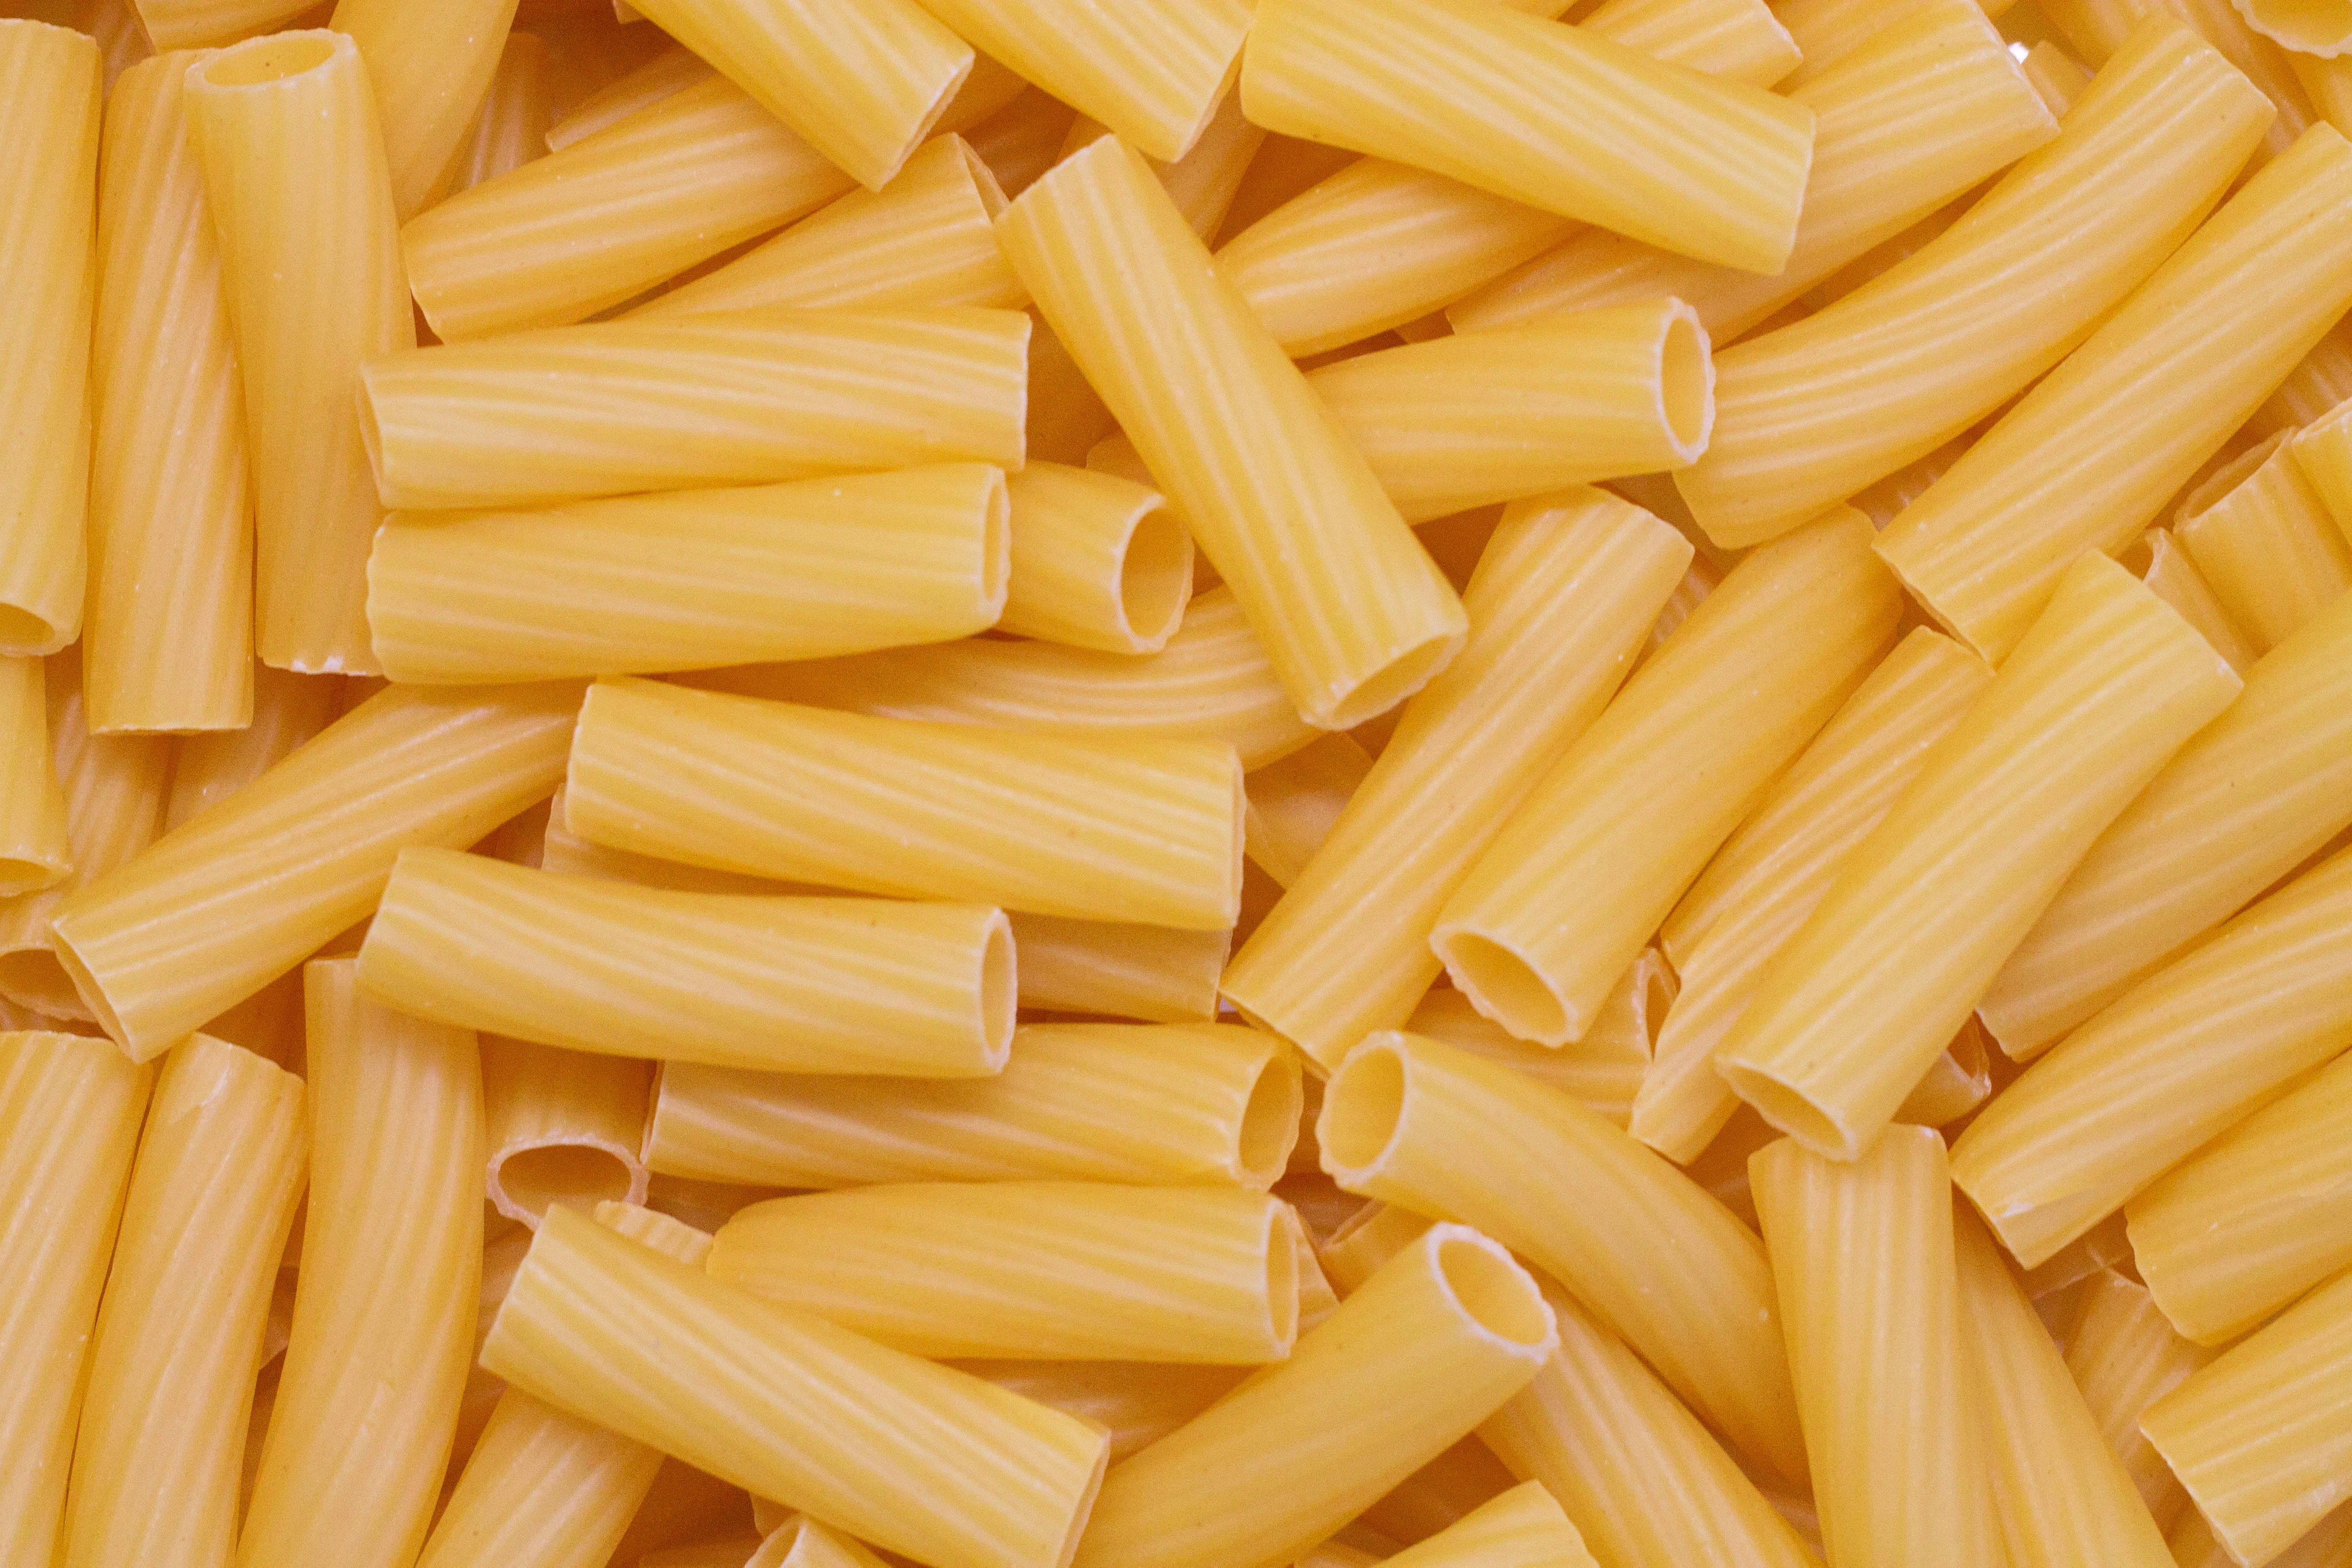 Tubes of yellow rigatoni pasta with light grooves running across each tube.